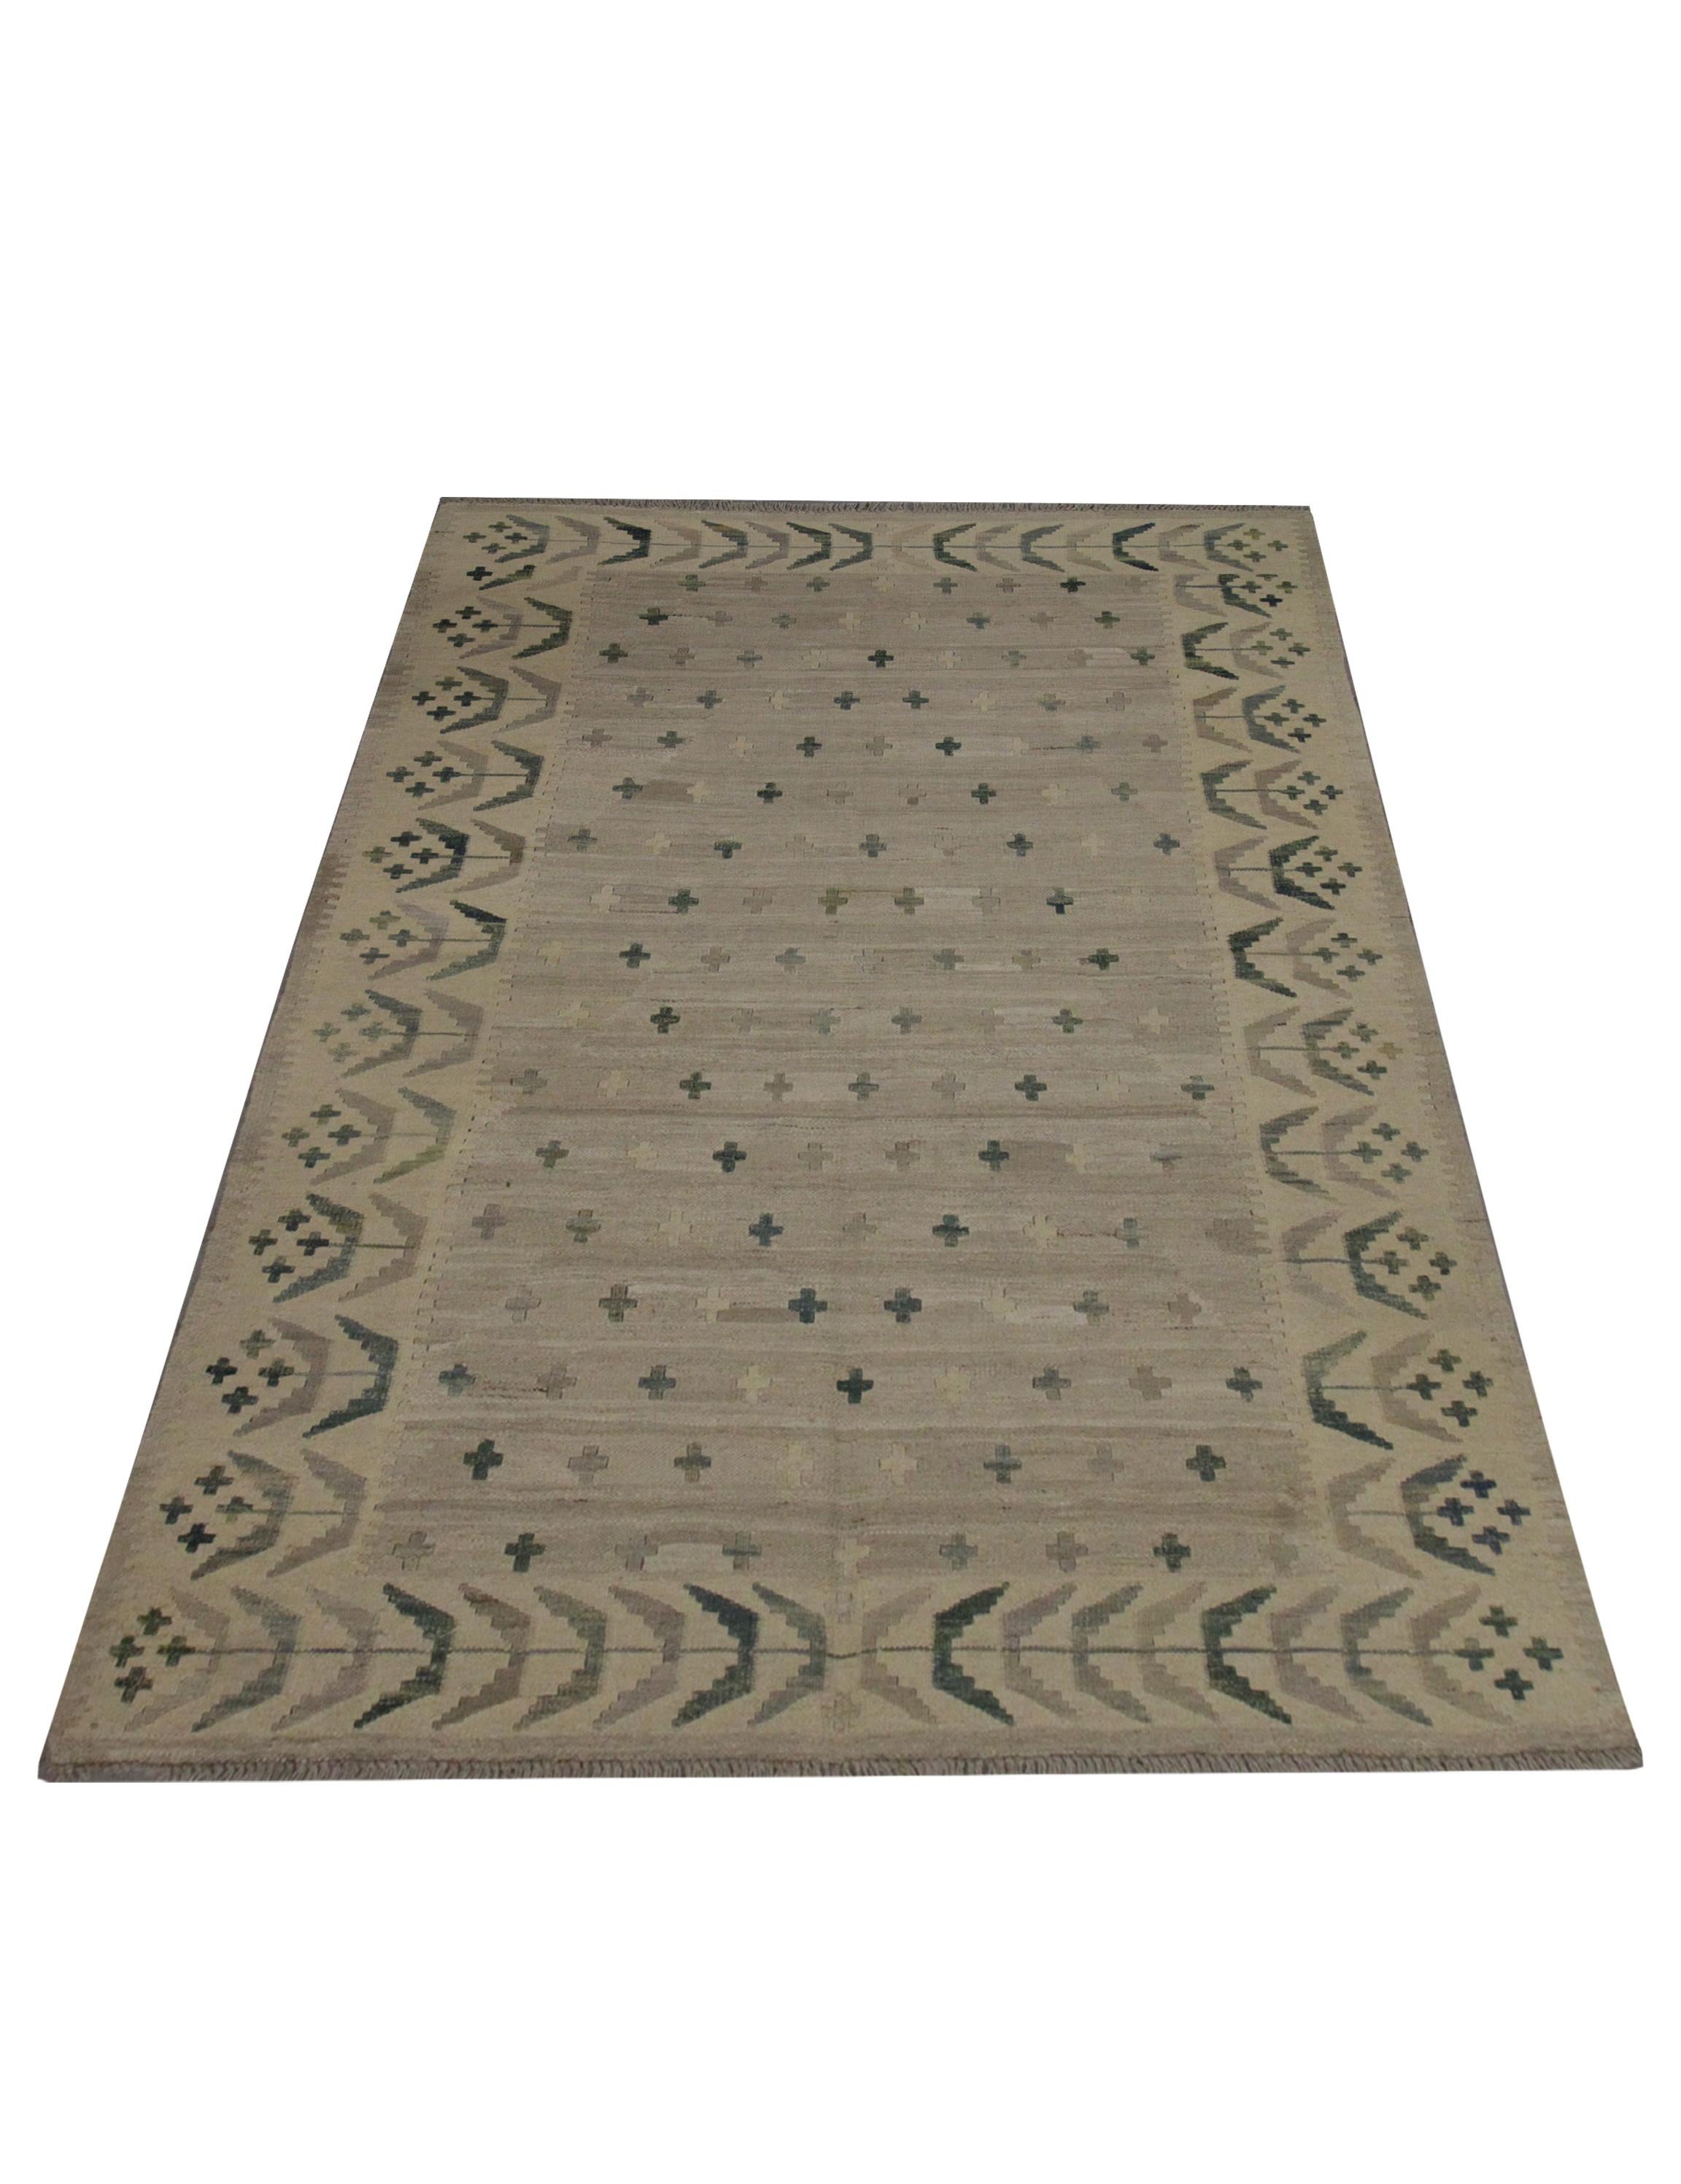 This unique wool Kilim area rug was woven in the early 21st century in Afghanistan. The design features a simple central design featuring a beige open field with Minimalist brown grey and blue cross motifs that are evenly scattered. A traditional